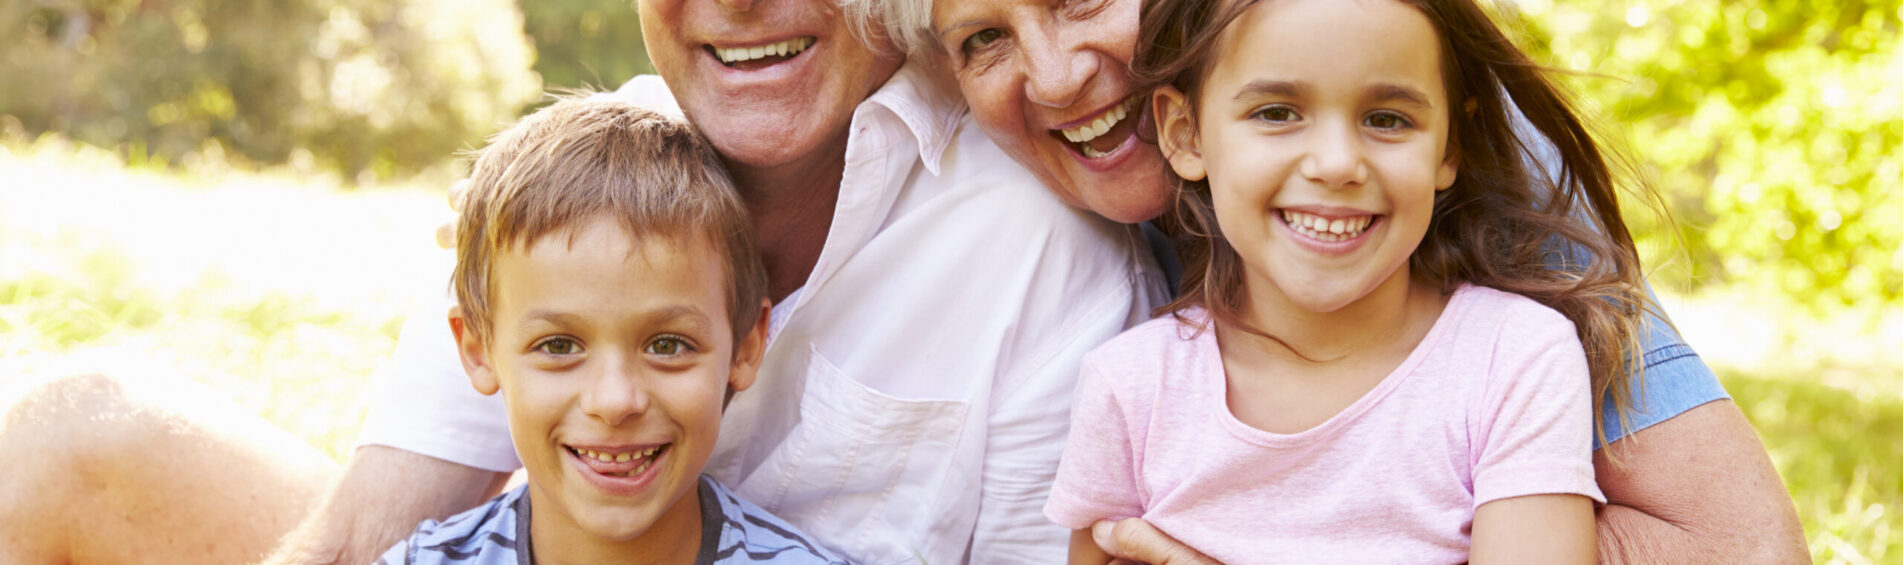 Are Stepgrandparents Important in Blended Families?